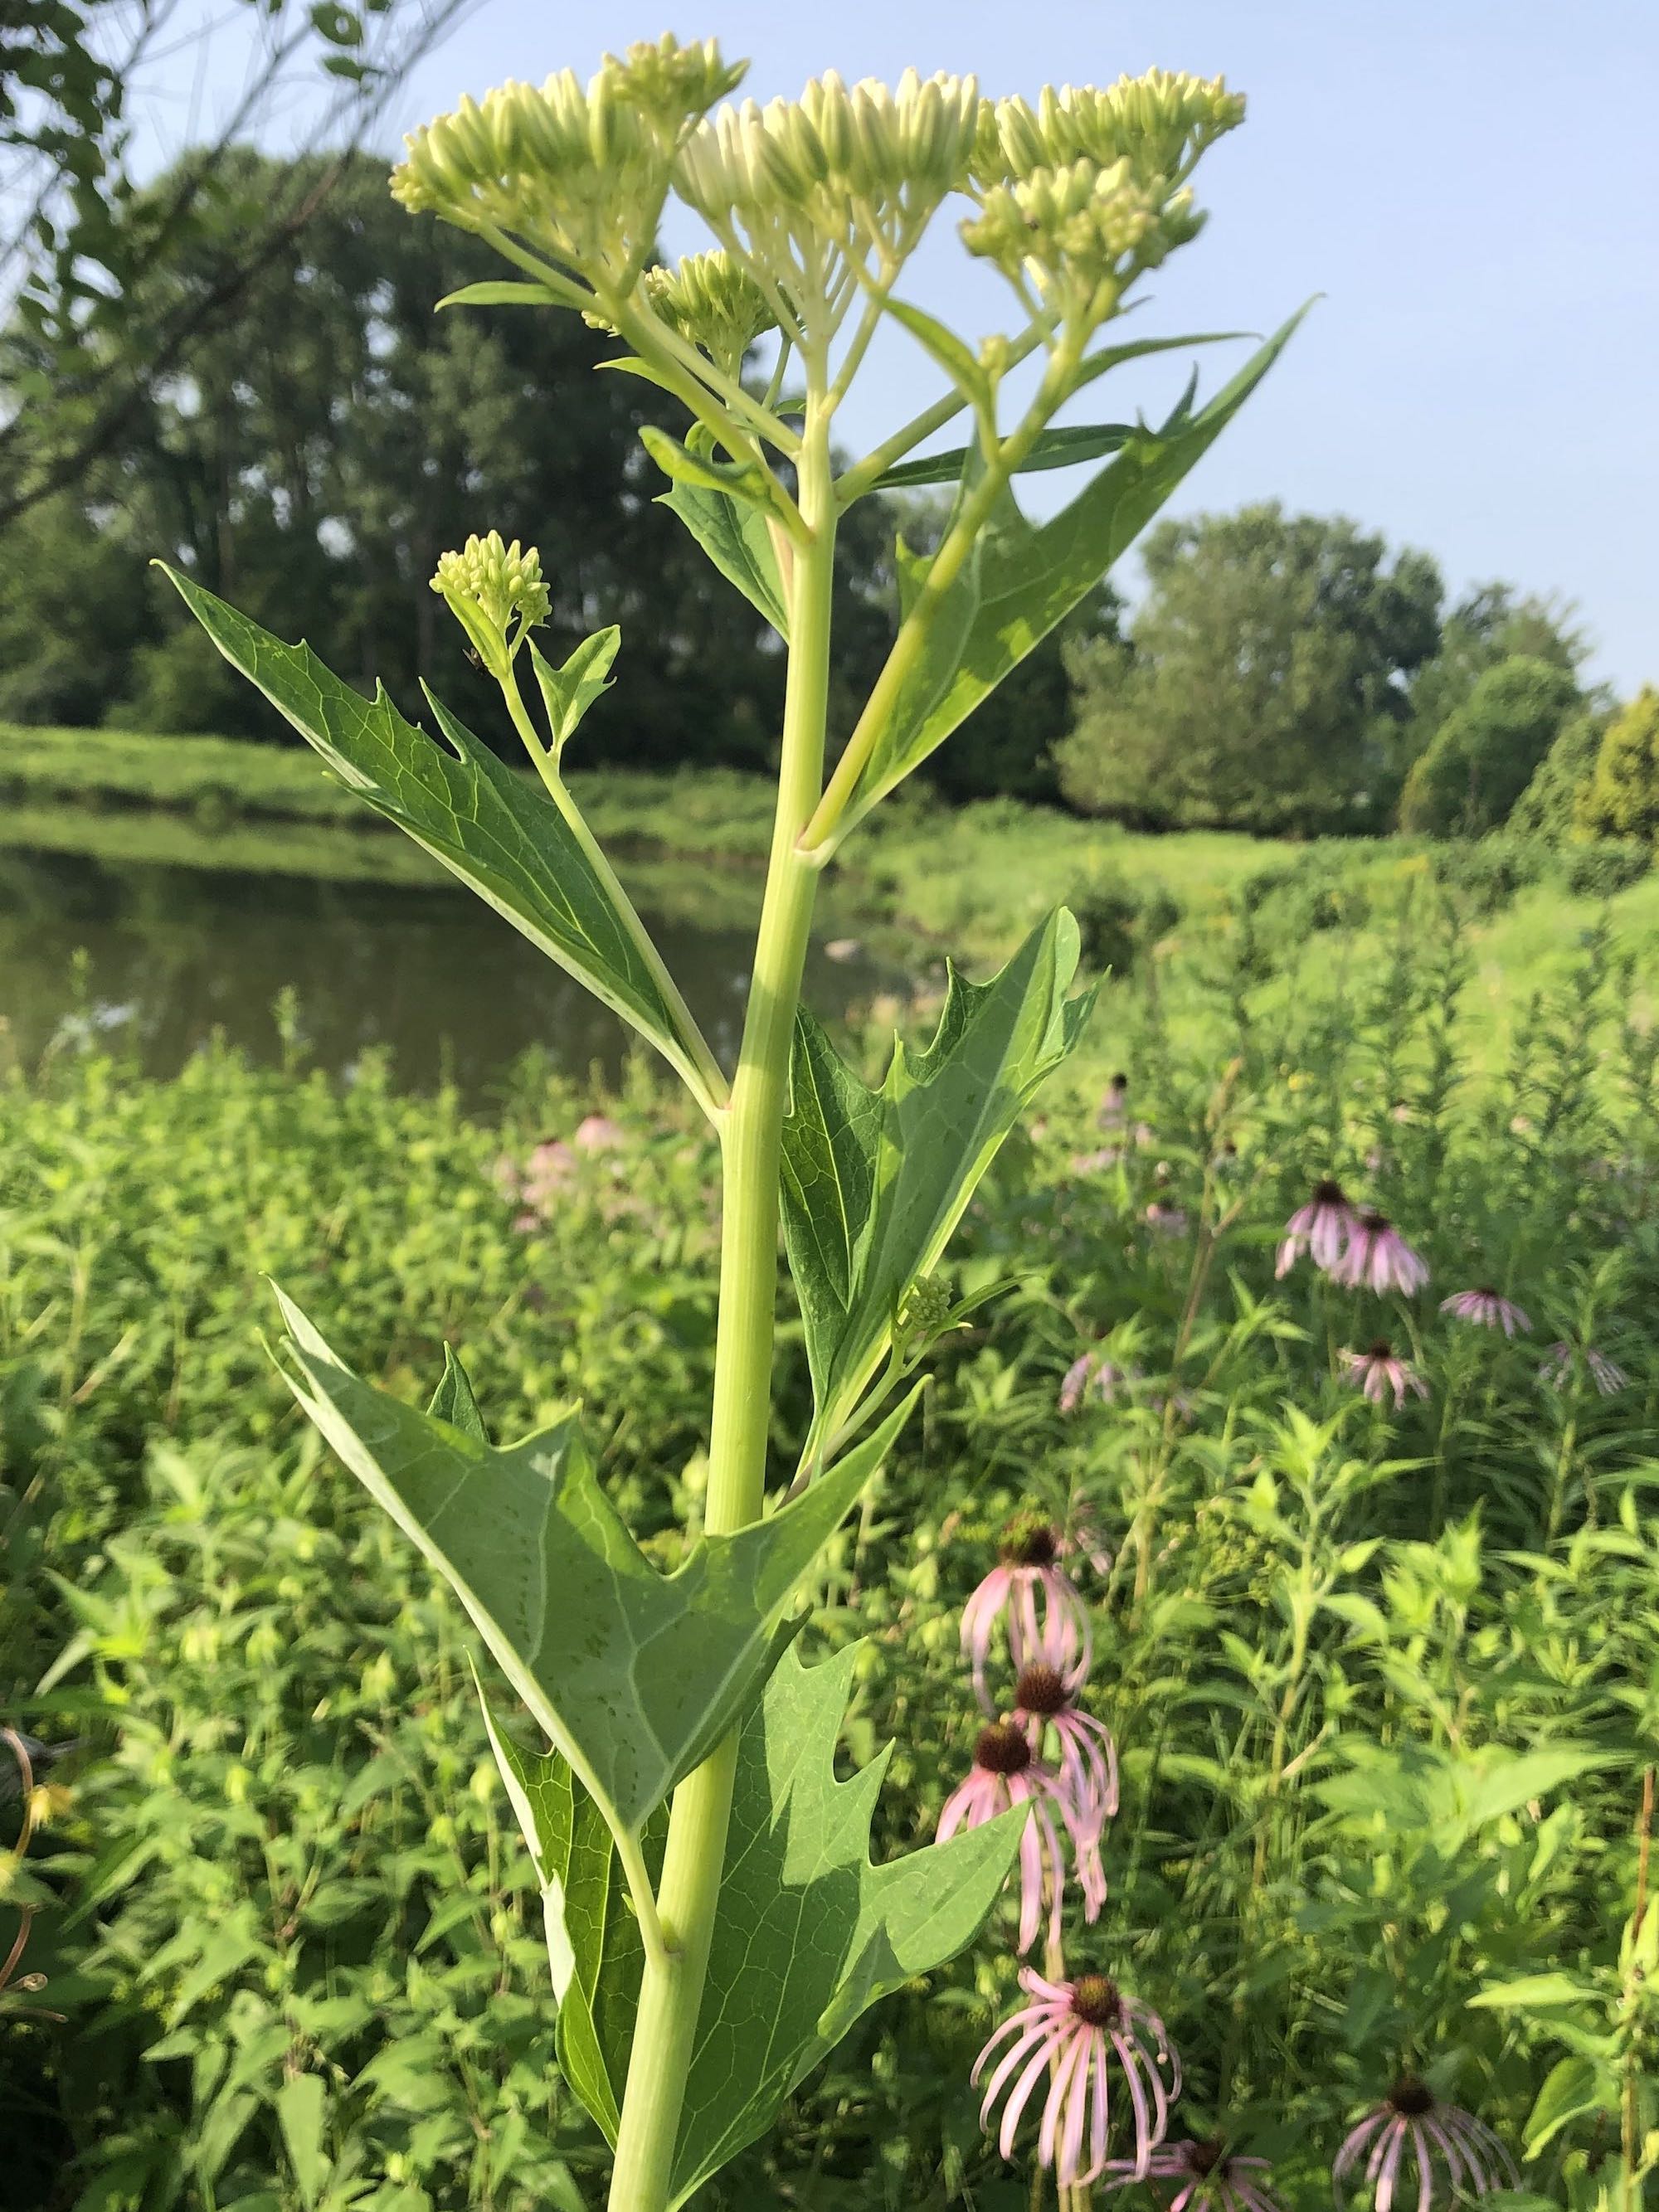 Pale Indian Plantain on bank of retaining pond on corner of Nakoma Road and Manitou Way in Madison, Wisconsin on July 9, 2019.